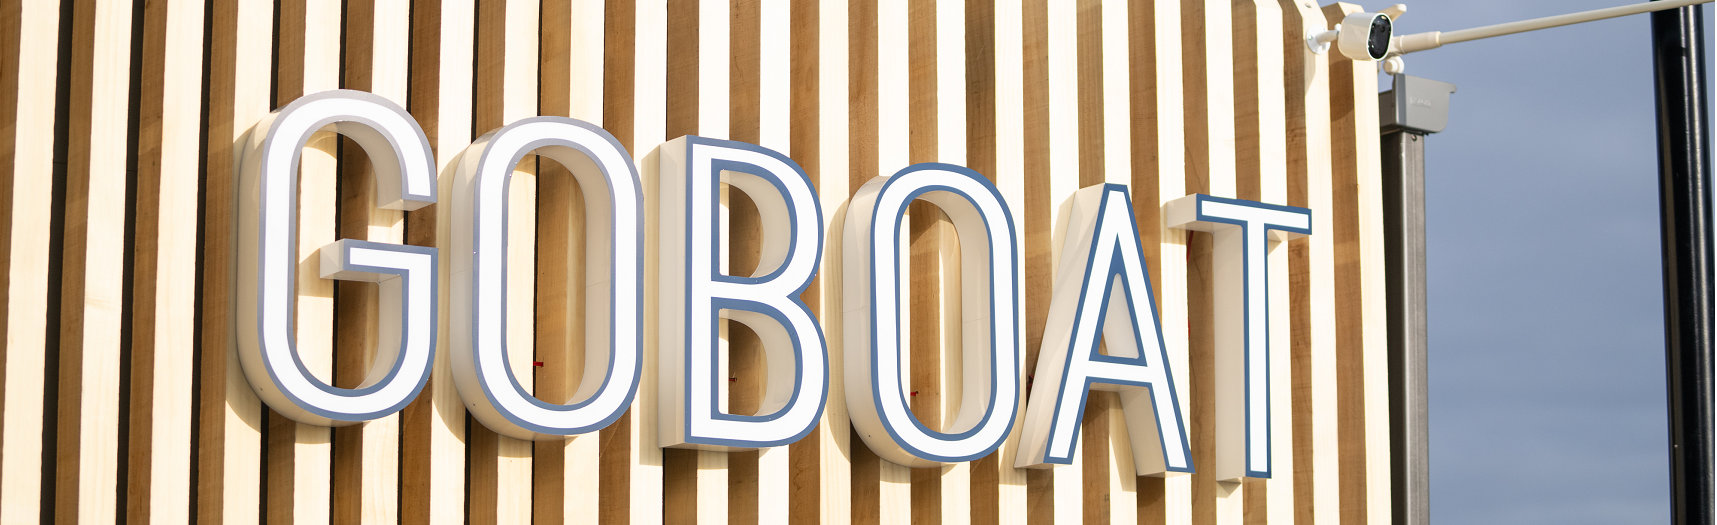 GoBoat sign on side of timber building